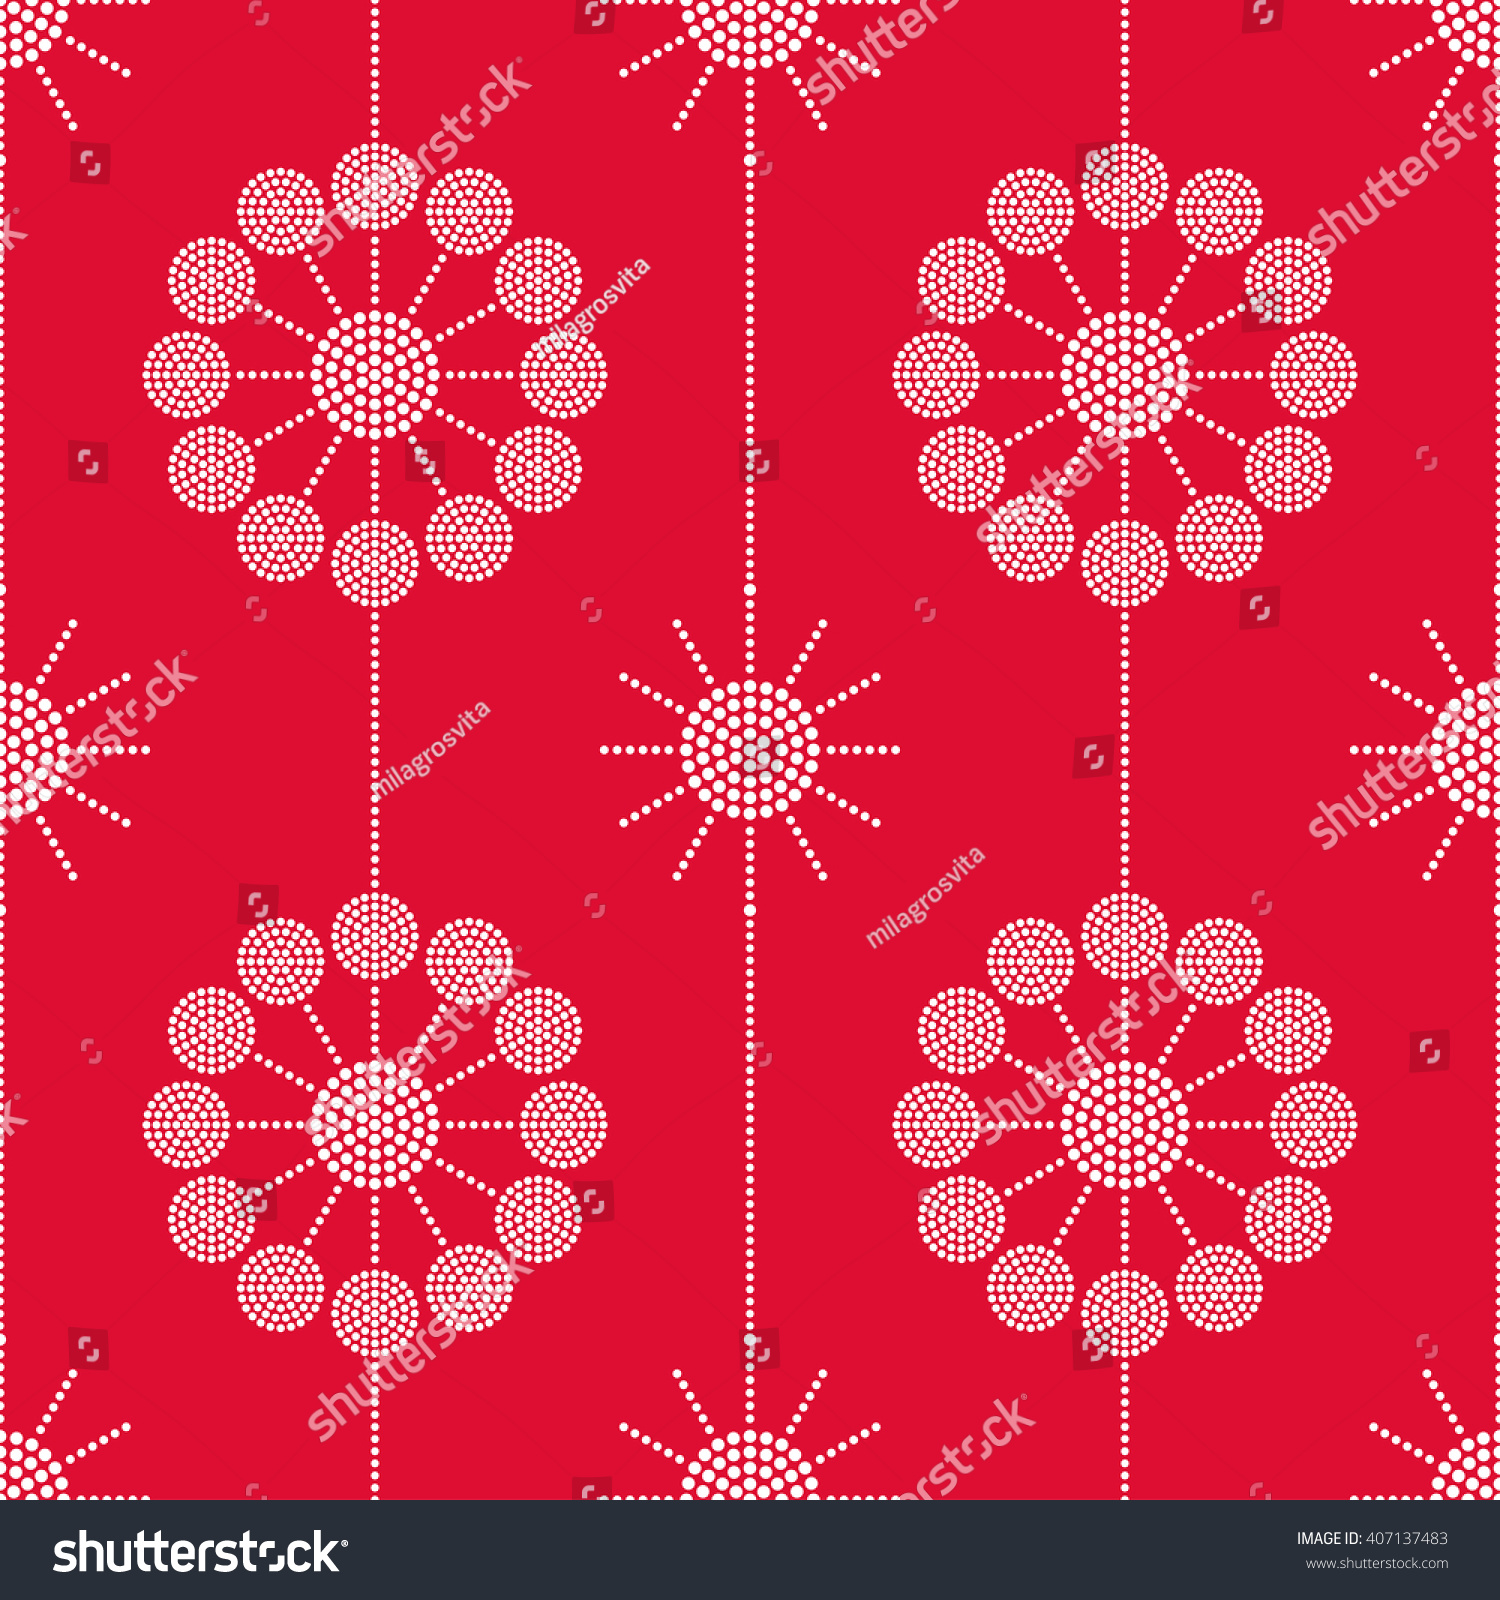 Vector Seamless Circle Pattern. Dotted pattern. Garlands of circles. Abstract monochrome Red background. Christmas pattern. Beads. Dots. Mosaic for textile, paper or ceramics. Vector Regular Texture #407137483